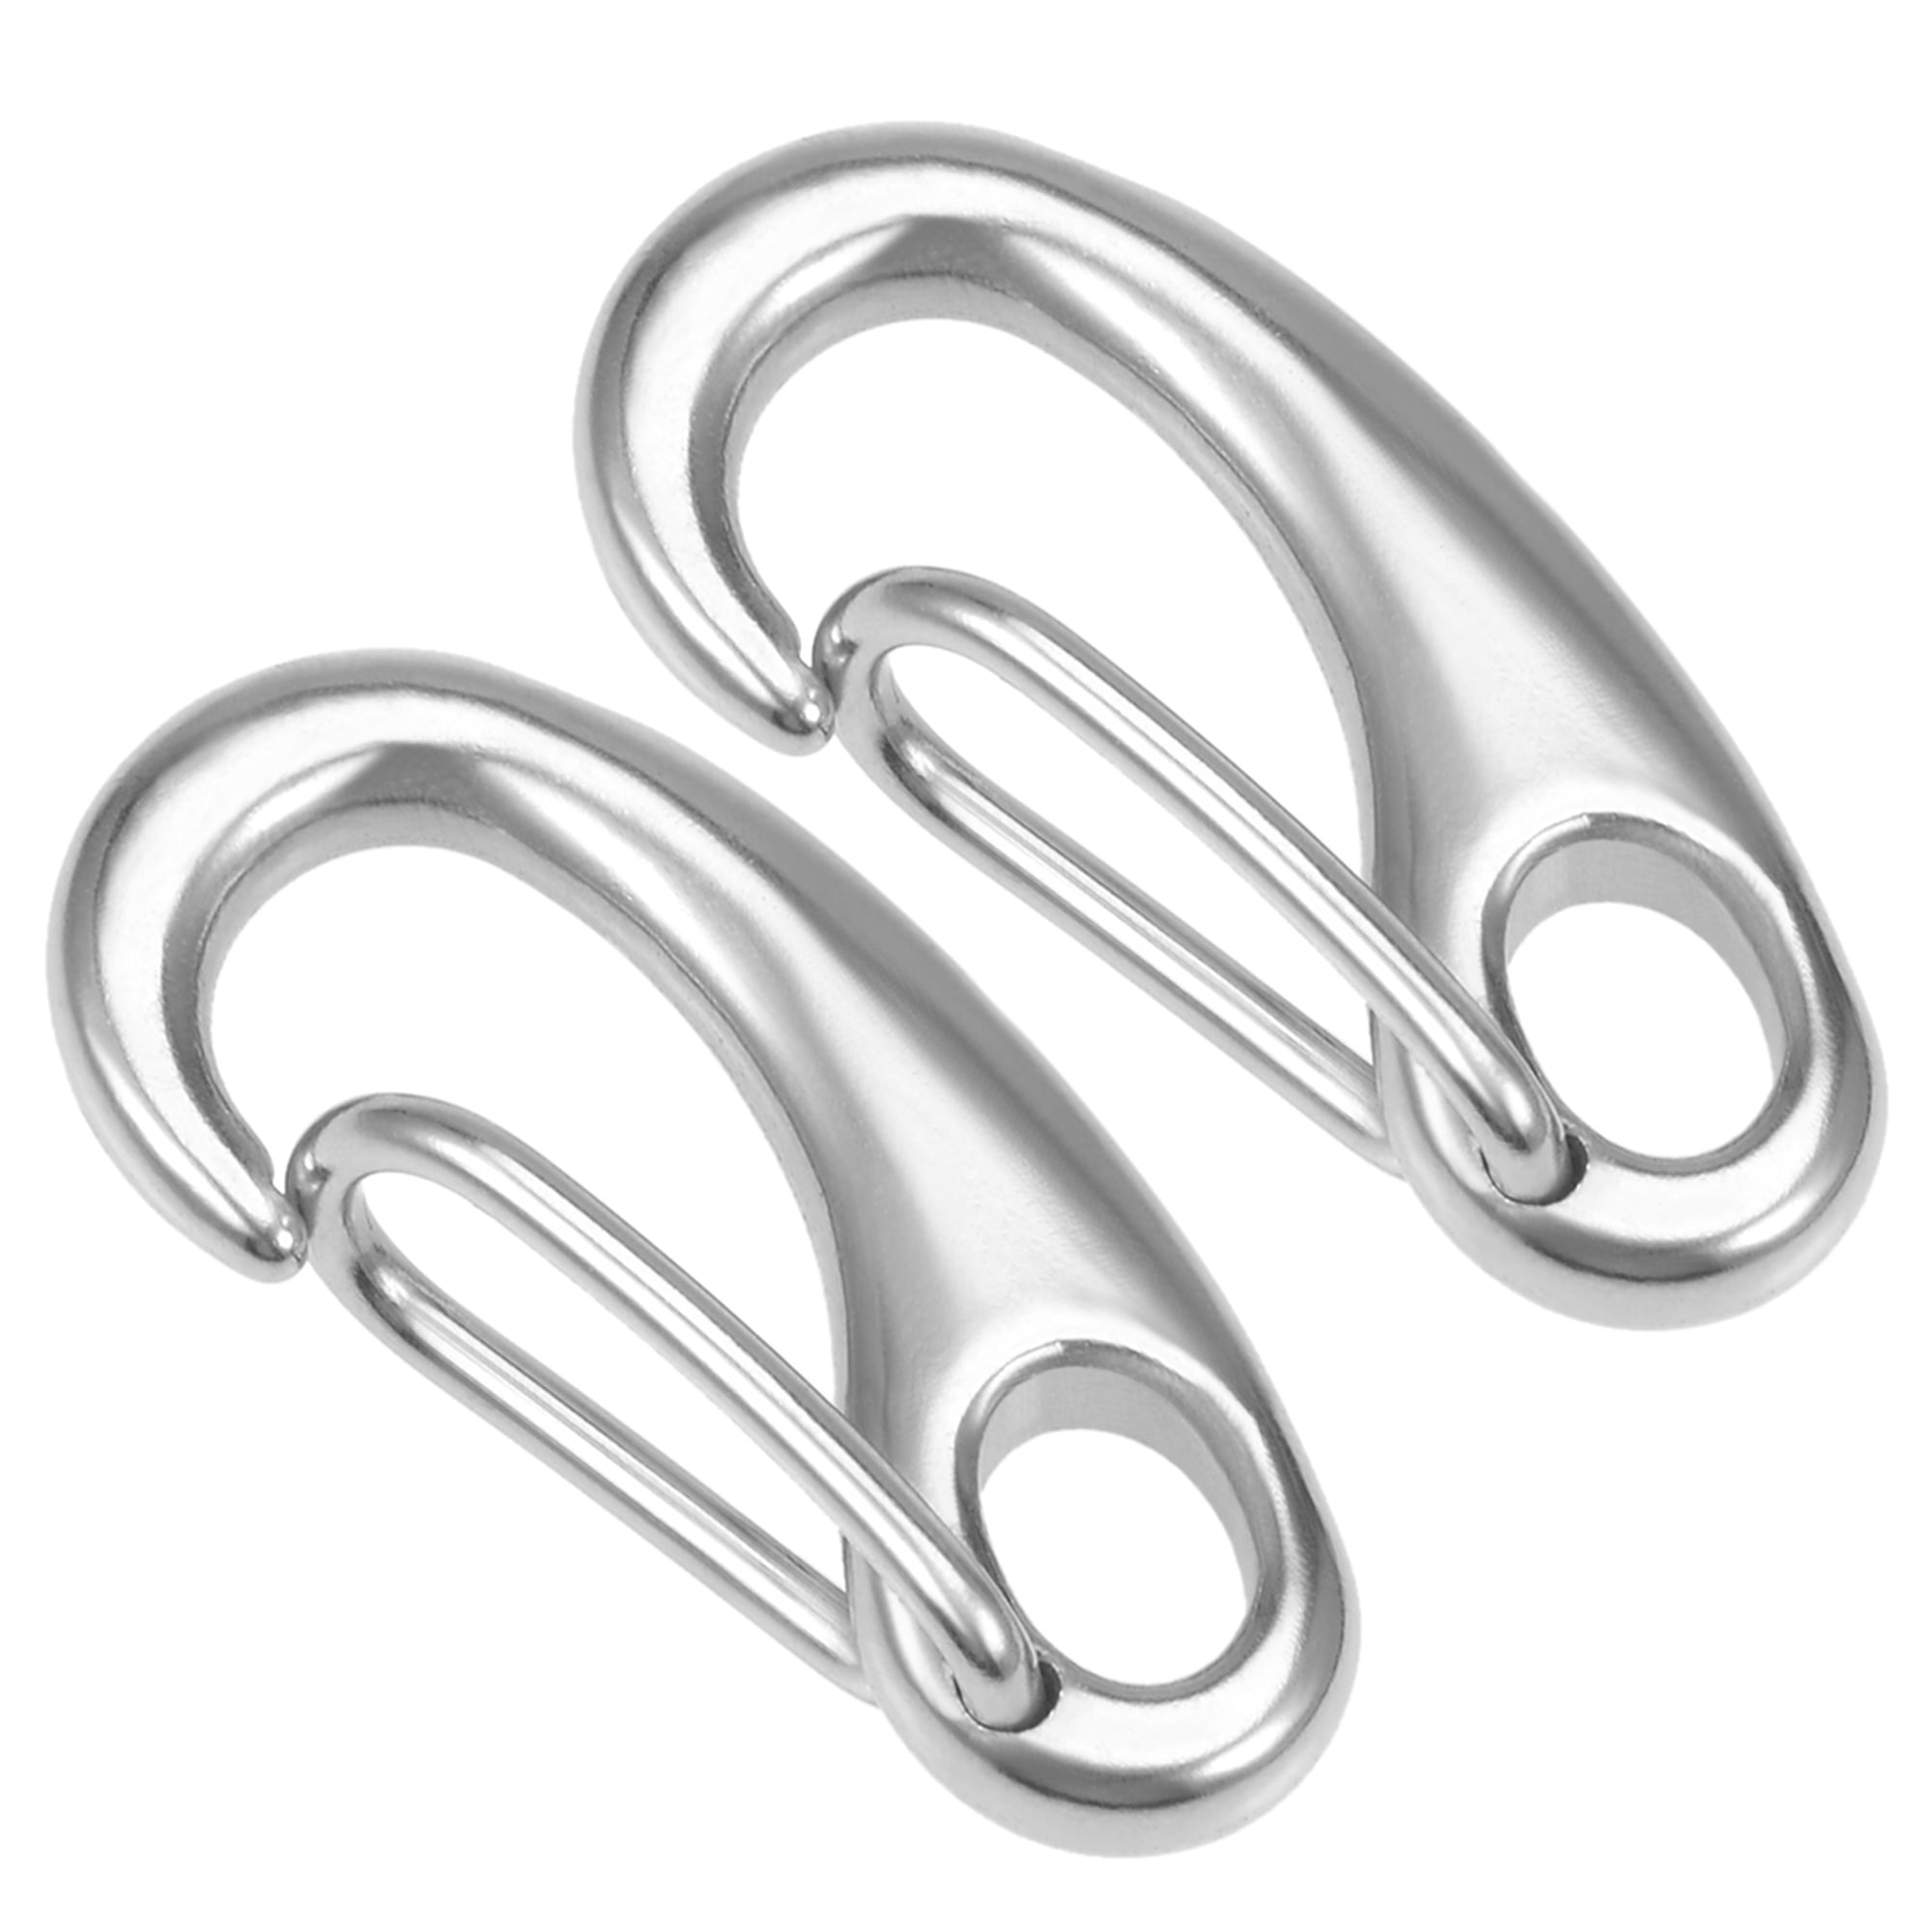 Stainless Steel #5 5 cm Swish Carabiners Clips S Hook with Ring 2 Lot of 